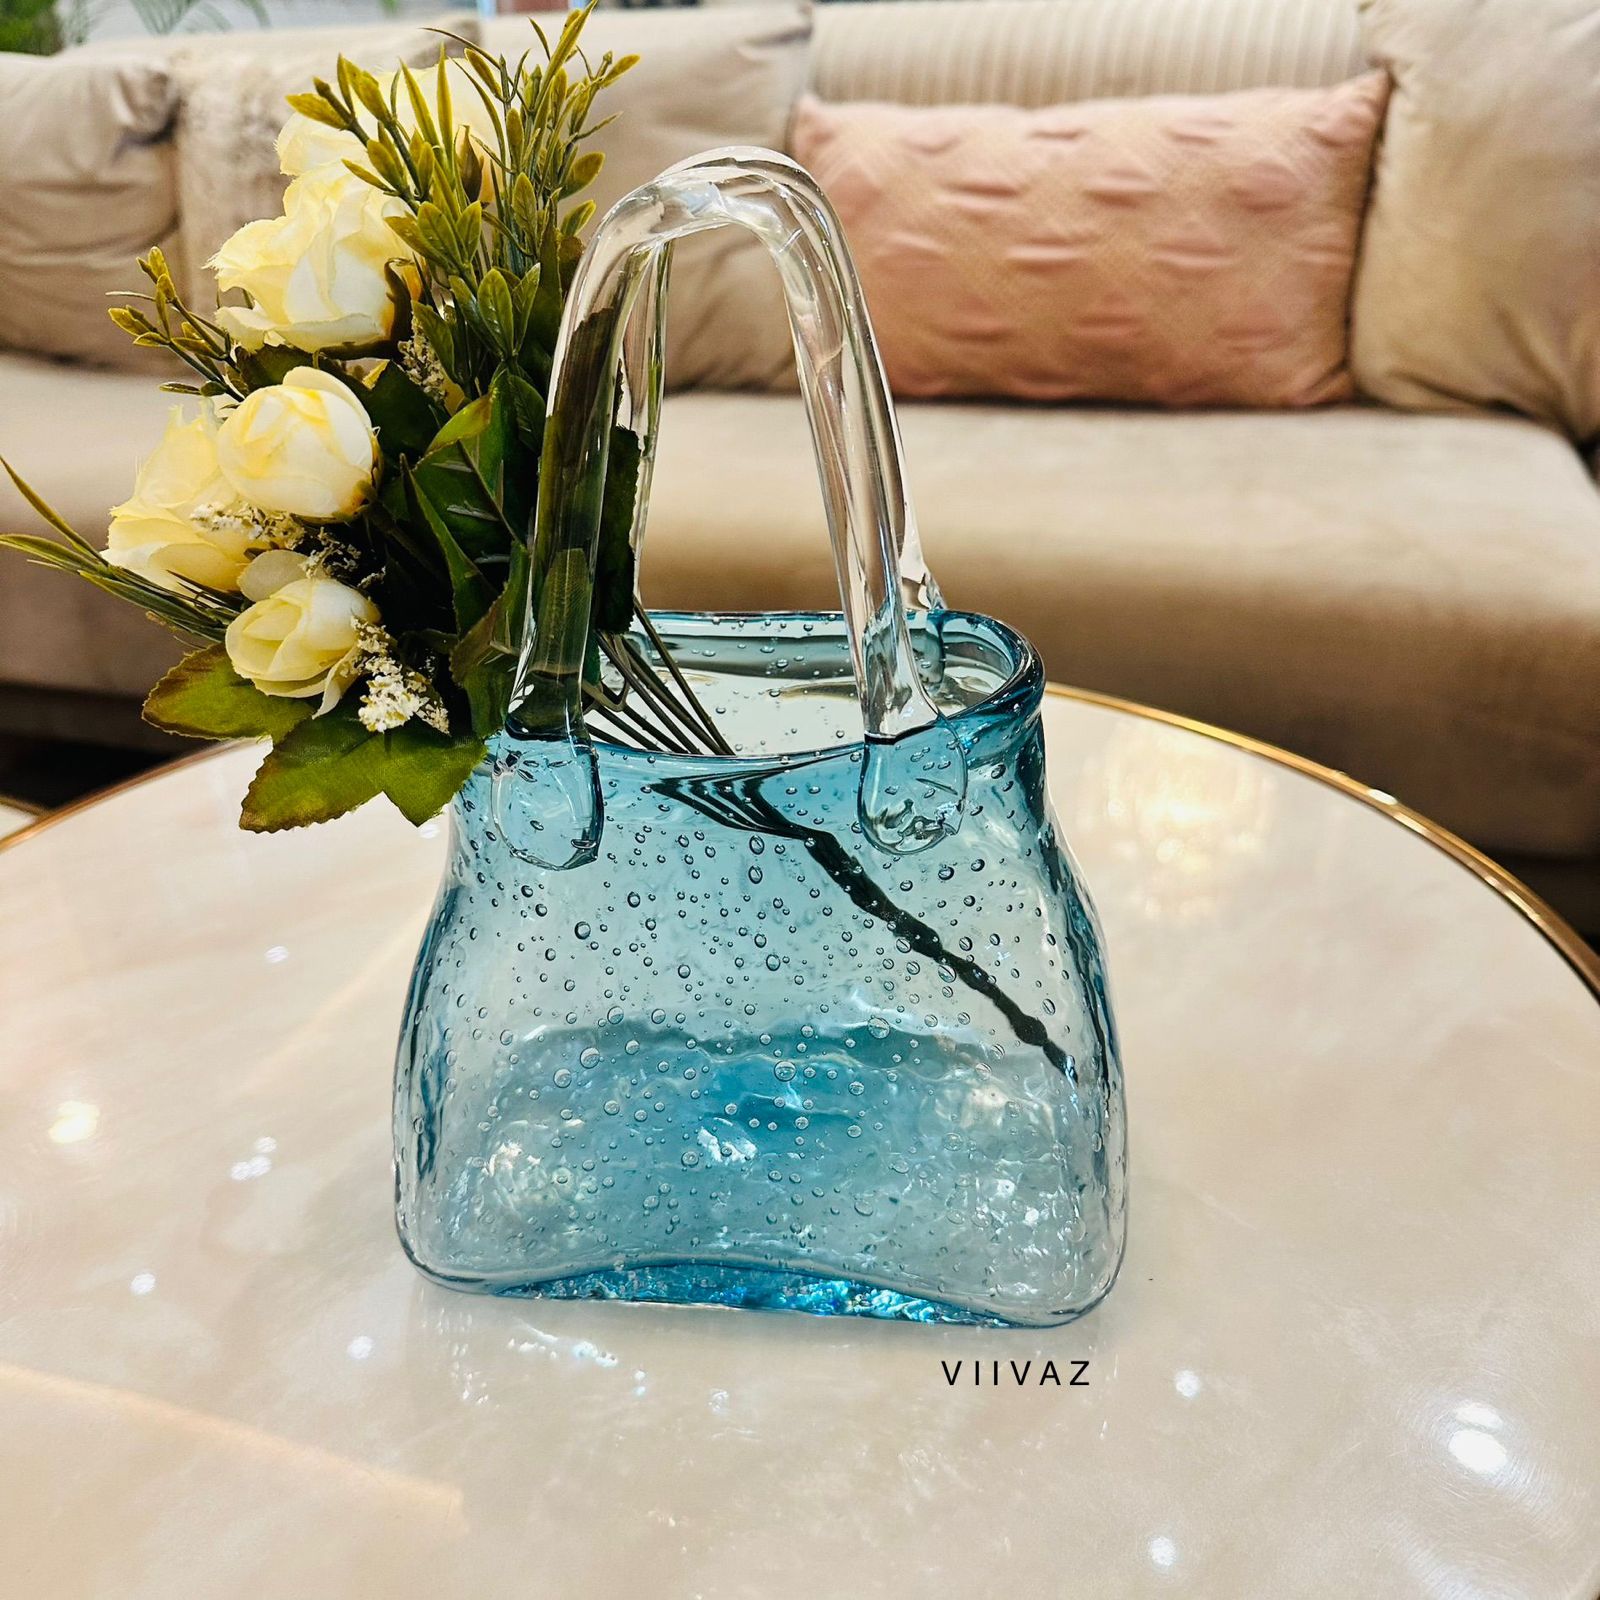 Bag with a vase